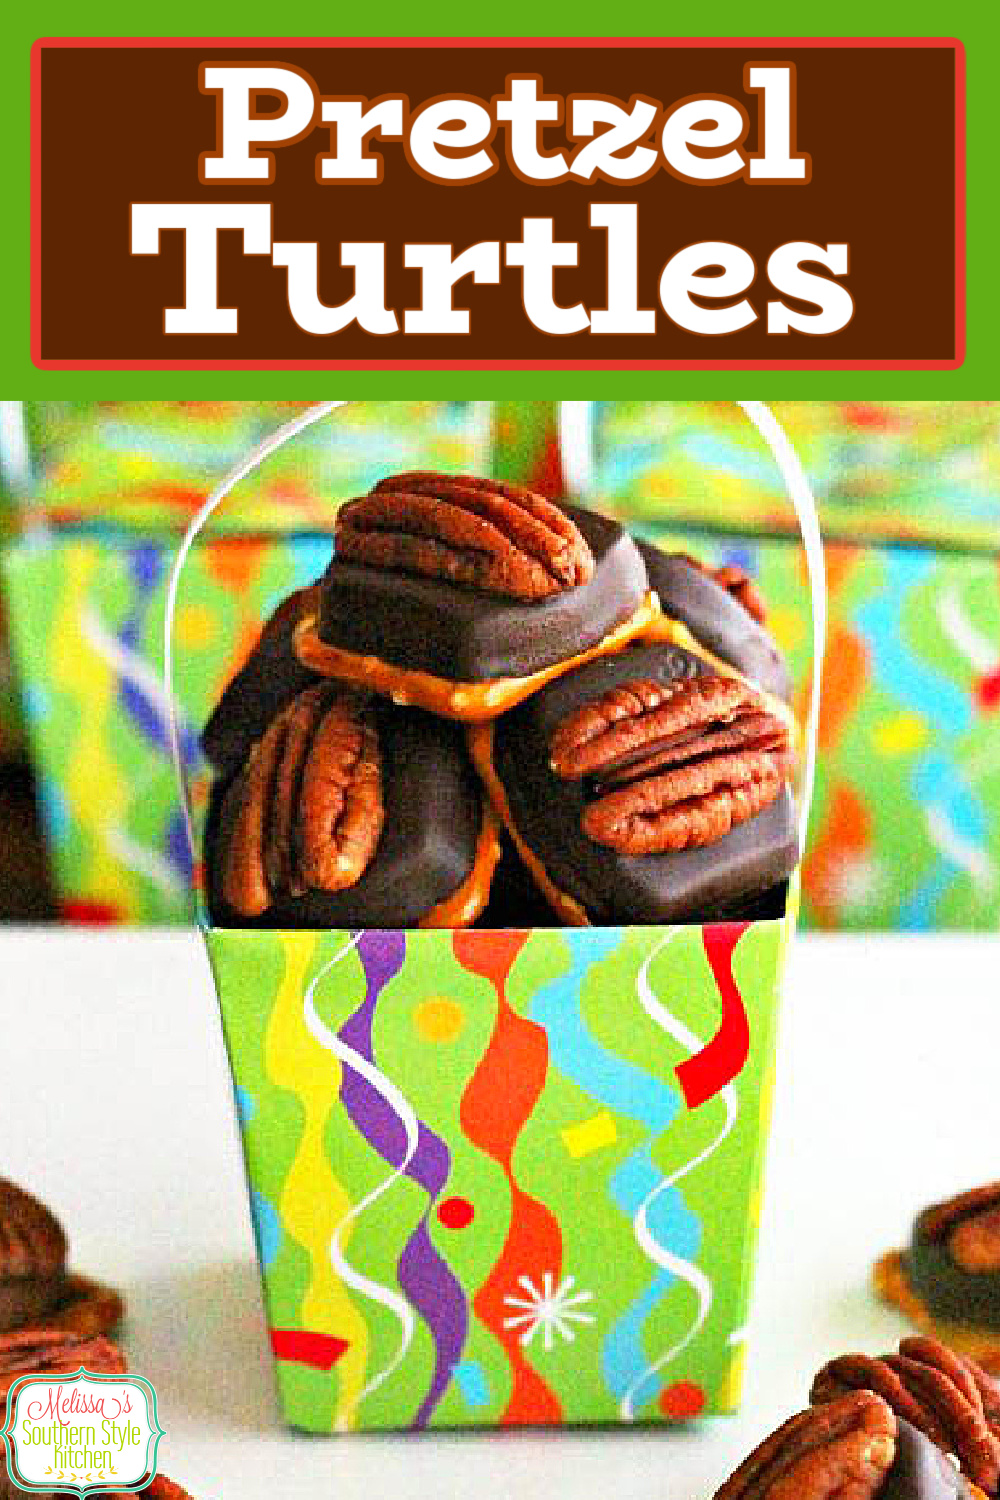 These fun Pretzel Turtles are guaranteed to satisfy your sweet and salty cravings! #pretzelturtles #turtles #caramel #chocolate #pretzels #holidaysweets #holidaybaking #candy #ROLO #desserts #christmascandy #holidayrecipes #christmas #southerrecipes #southernfood #desserts #dessertfoodrecipes via @melissasssk